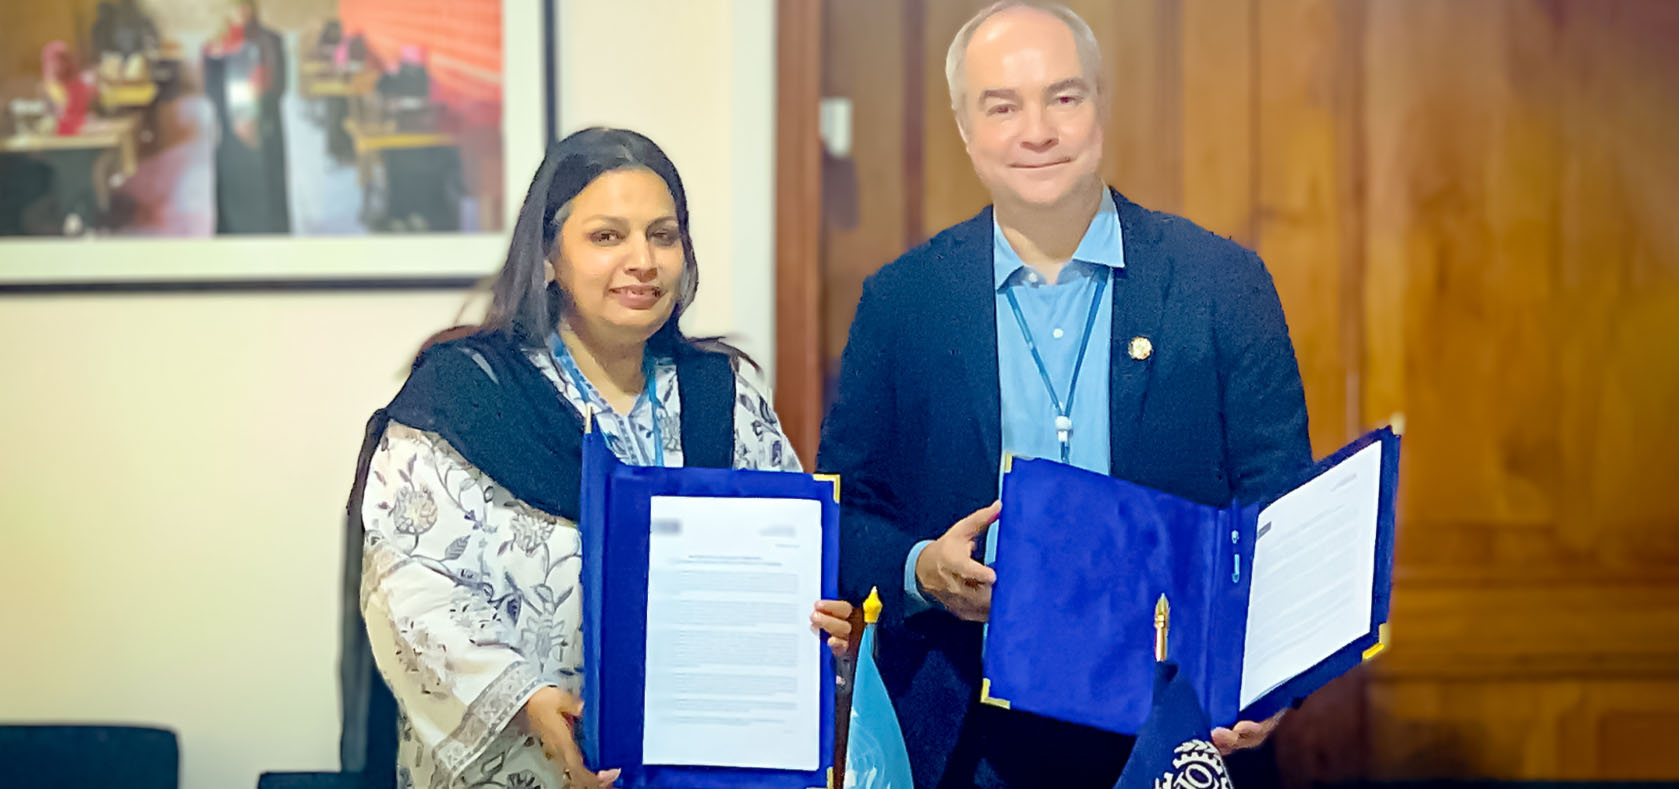 (from right) Gitanjali Singh, Head of Office,a.i, UN Women Bangladesh and Tuomo Poutiainen, Country Director ILO Bangladesh singed an inter-agency agreement to promote women’s economic empowerment in Bangladesh. Photo: UN Women/Shararat Islam